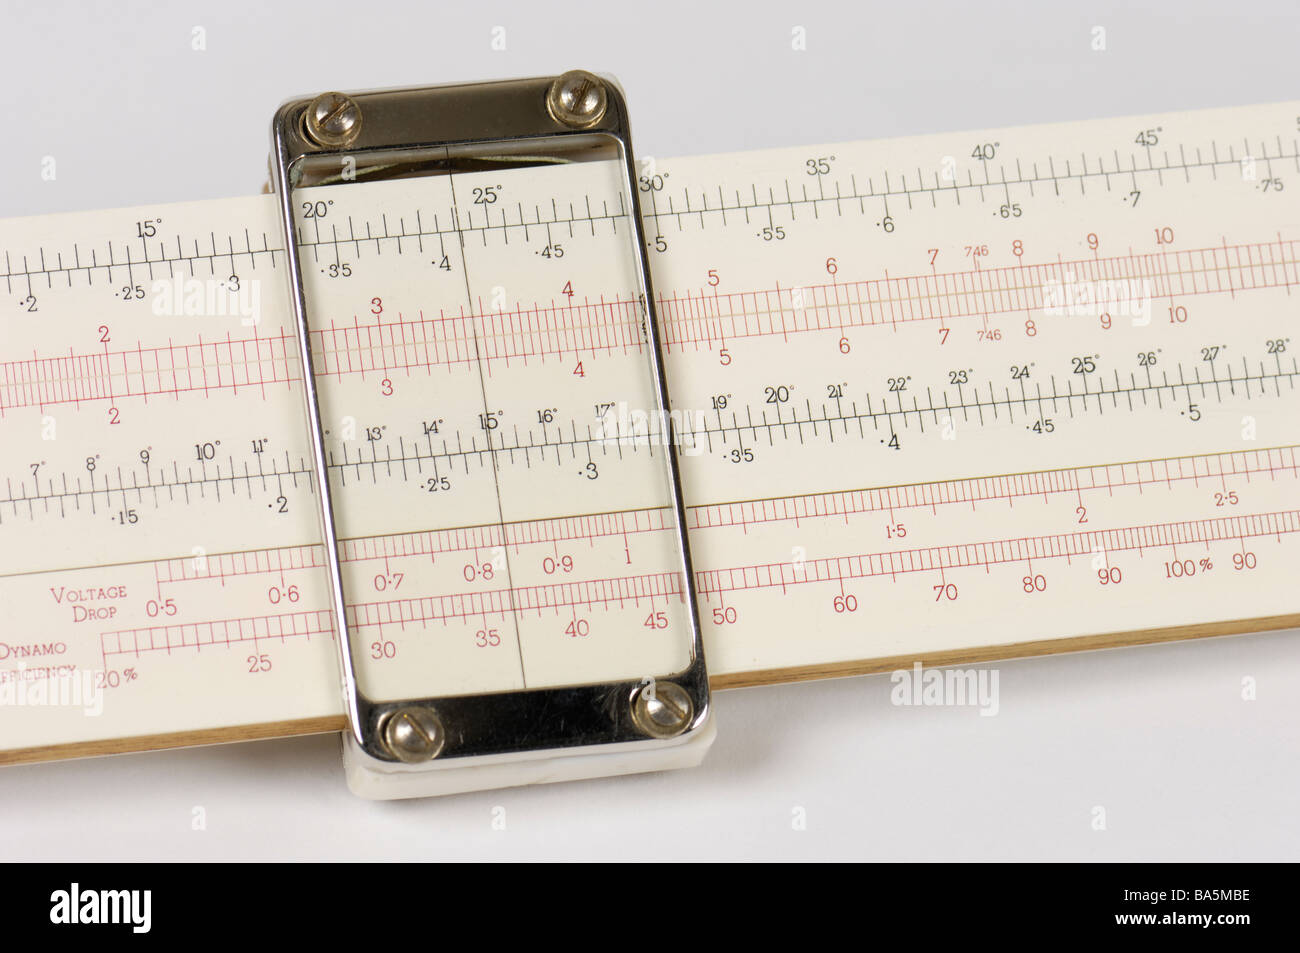 Detail of a slide rule scale and cursor of a slide rule. Stock Photo